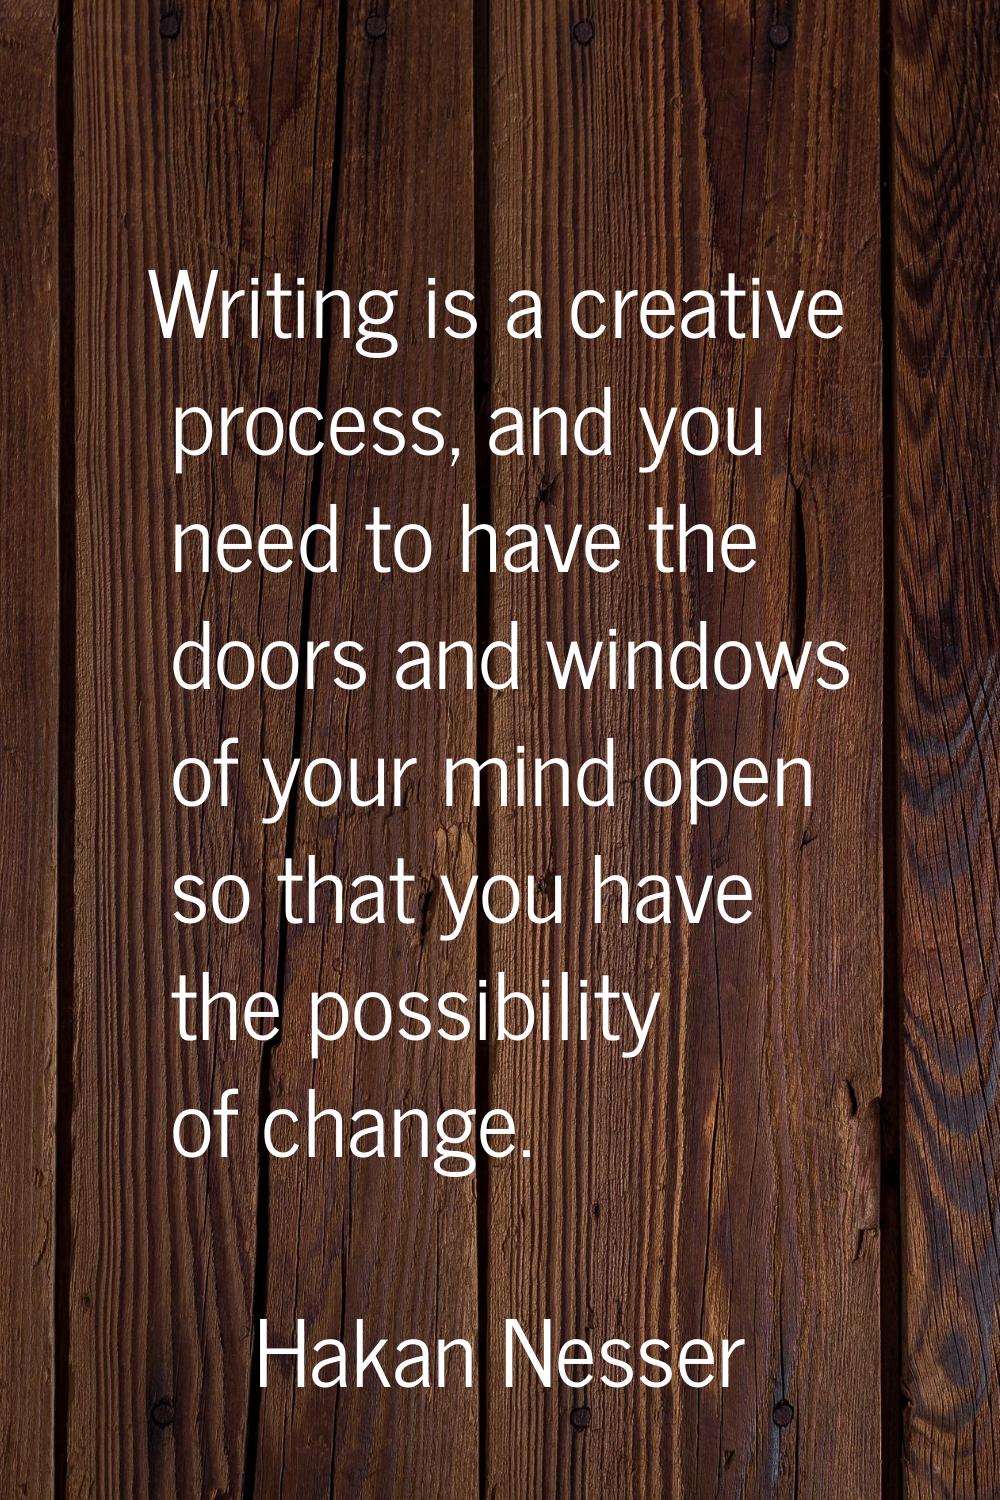 Writing is a creative process, and you need to have the doors and windows of your mind open so that